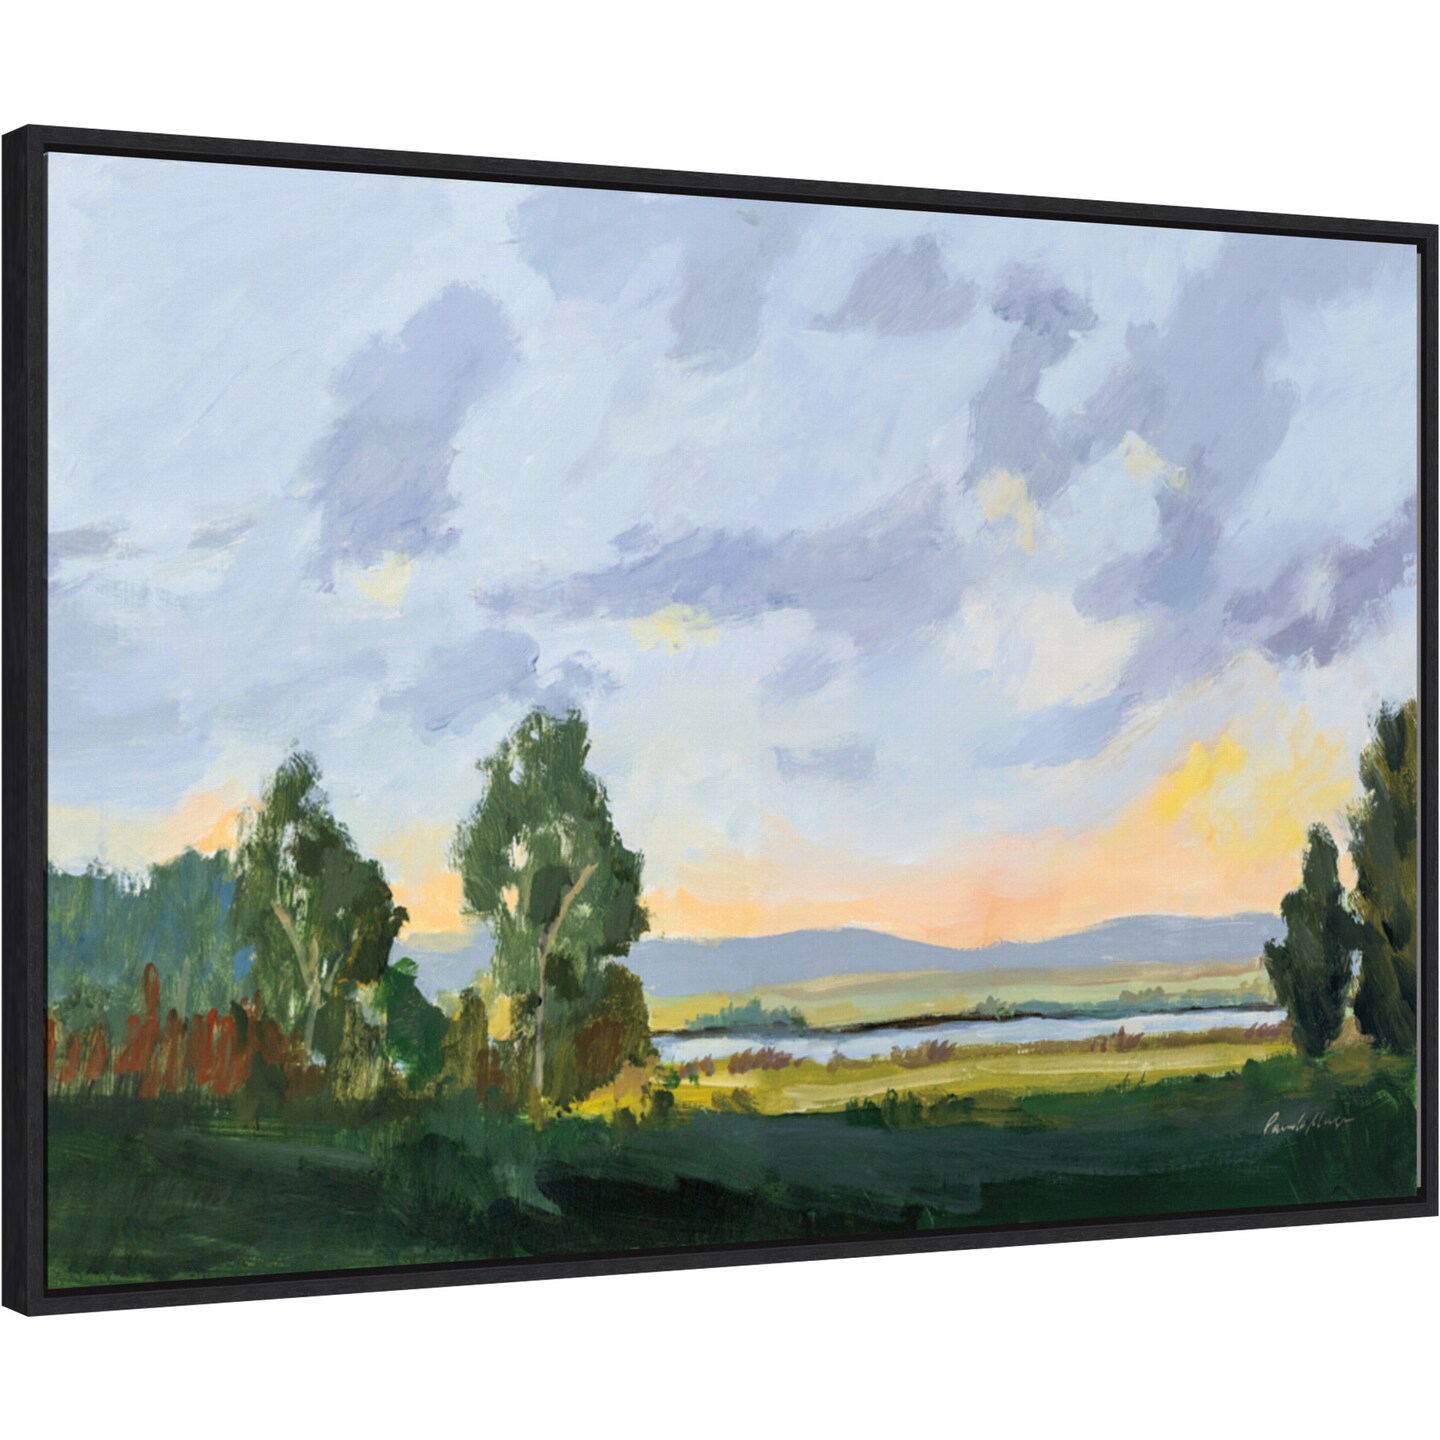 Evening Skies I by Pamela Munger 33-in. W x 23-in. H. Canvas Wall Art Print Framed in Black